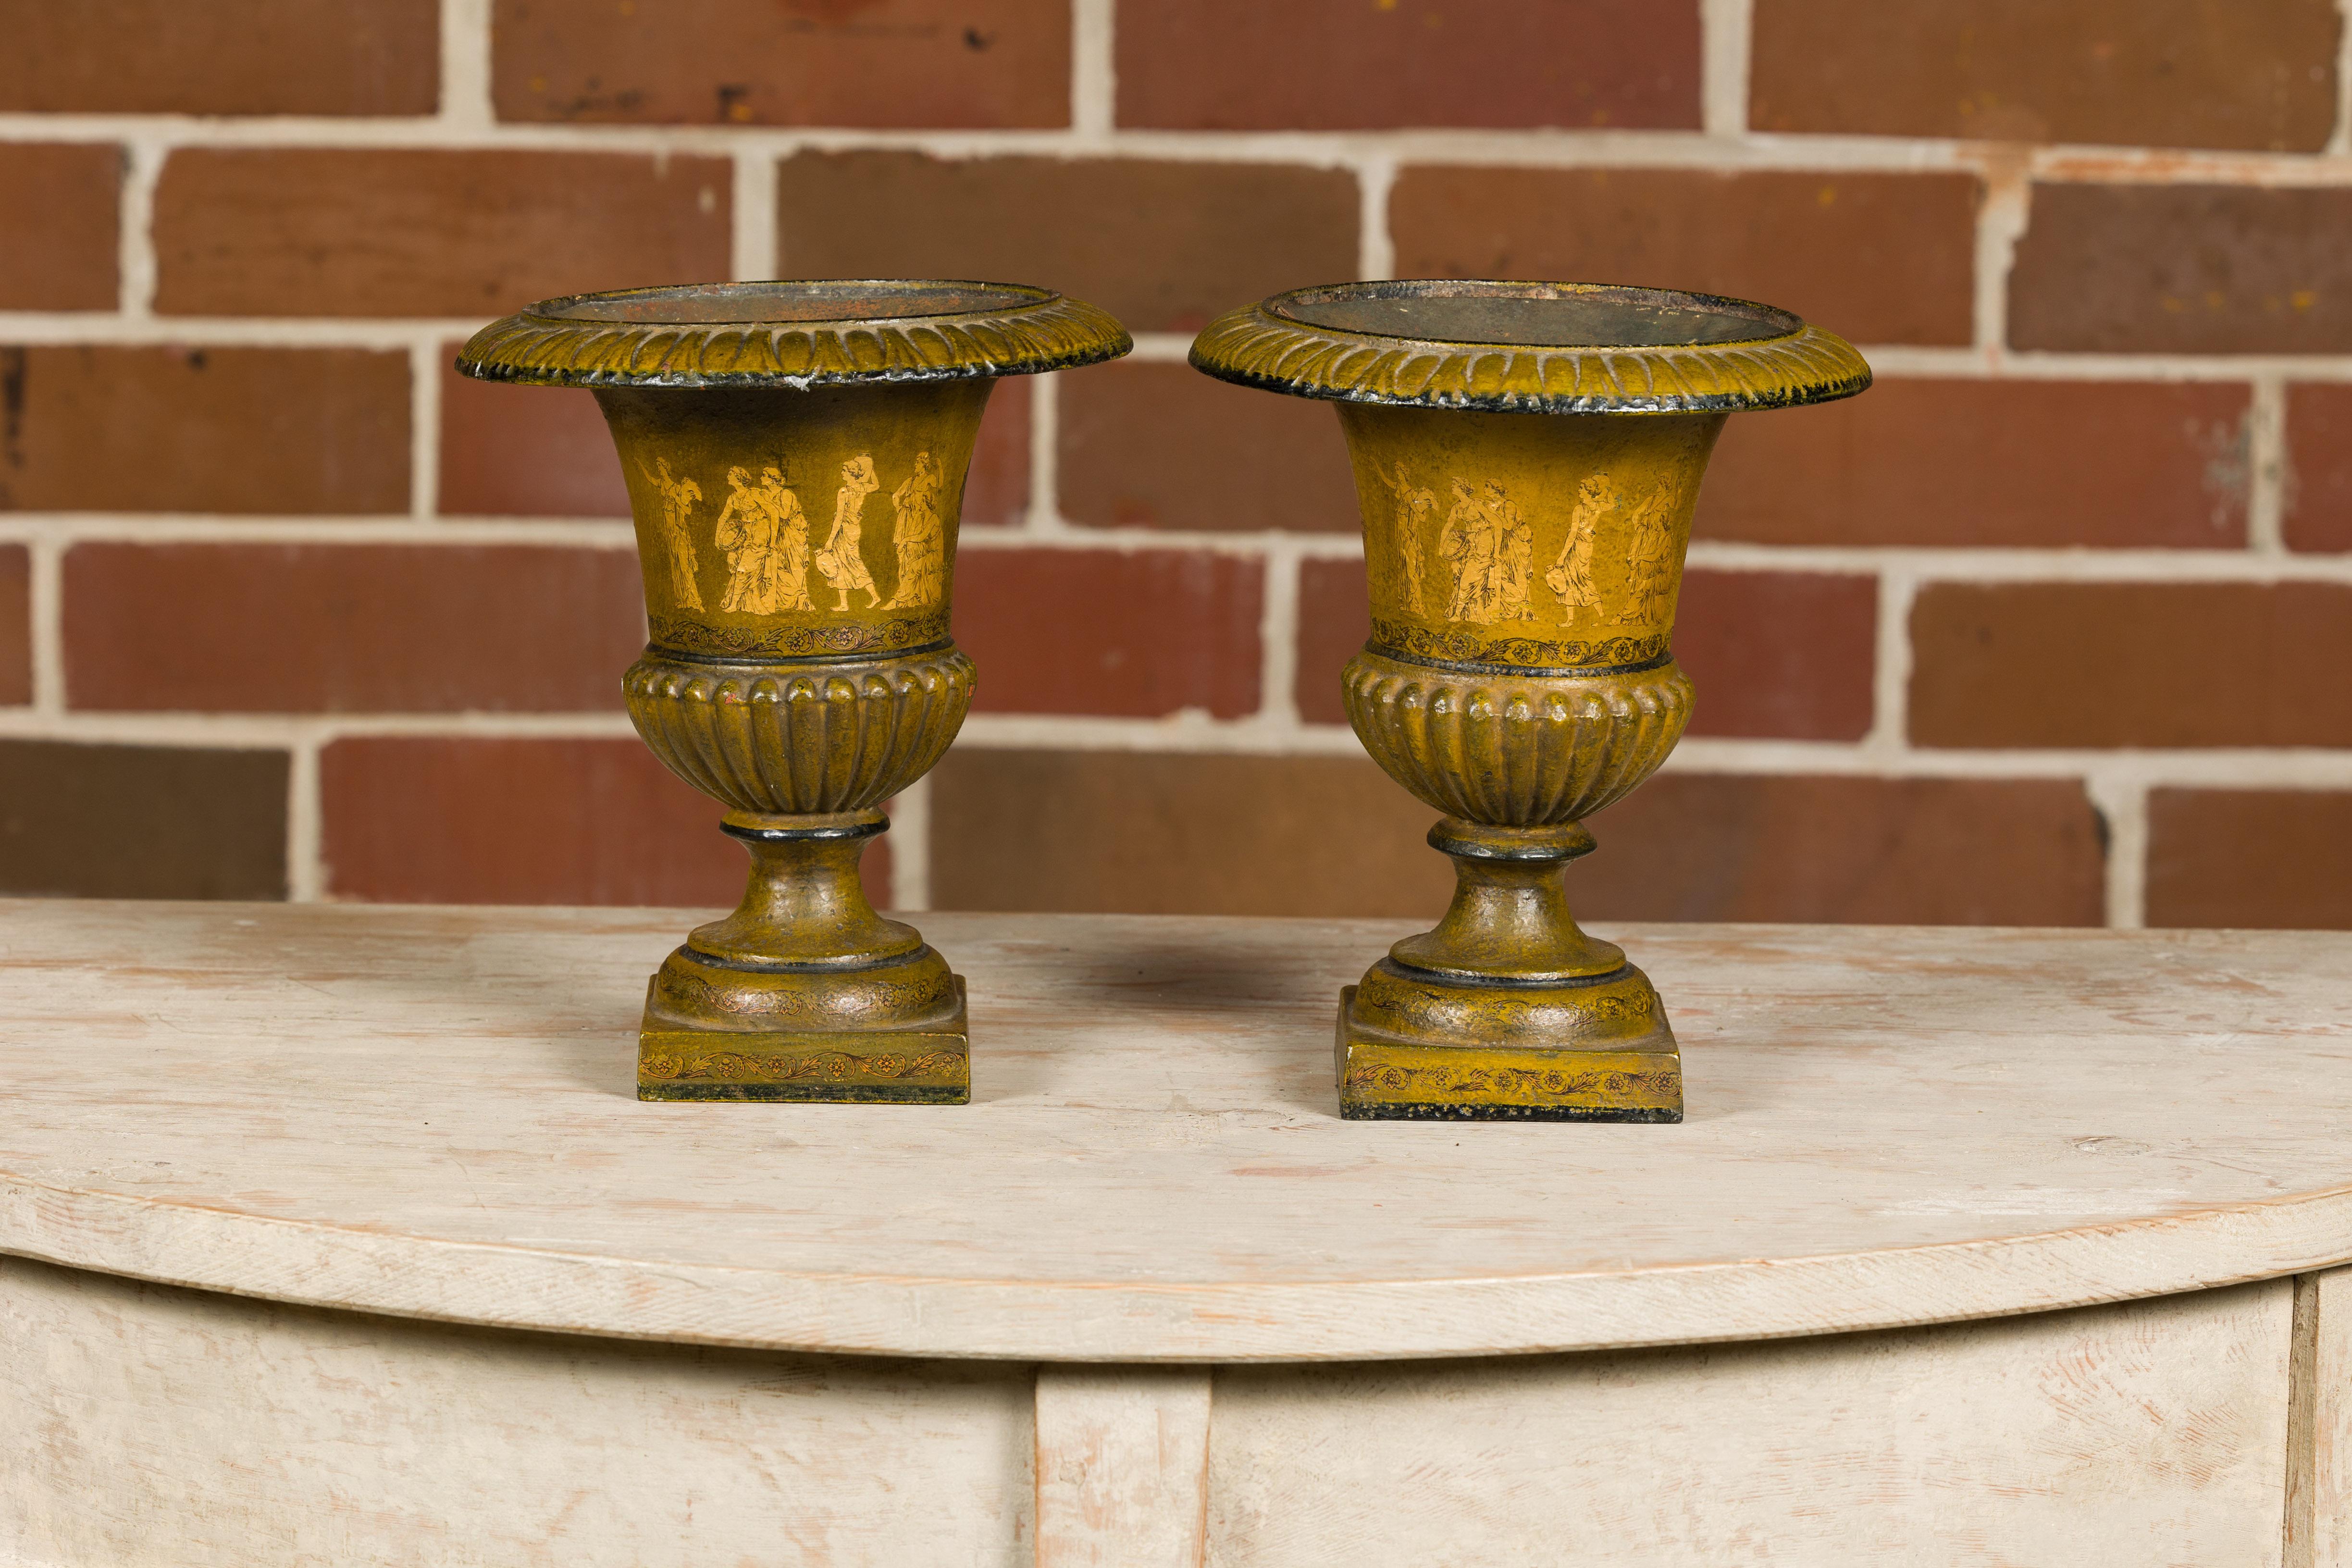 A pair of Neoclassical style iron urn planters from circa 1900 with liners and mythological figures. This pair of Neoclassical-style iron urn planters from circa 1900 embodies the grandeur and elegance of a bygone era. Each planter is a masterful